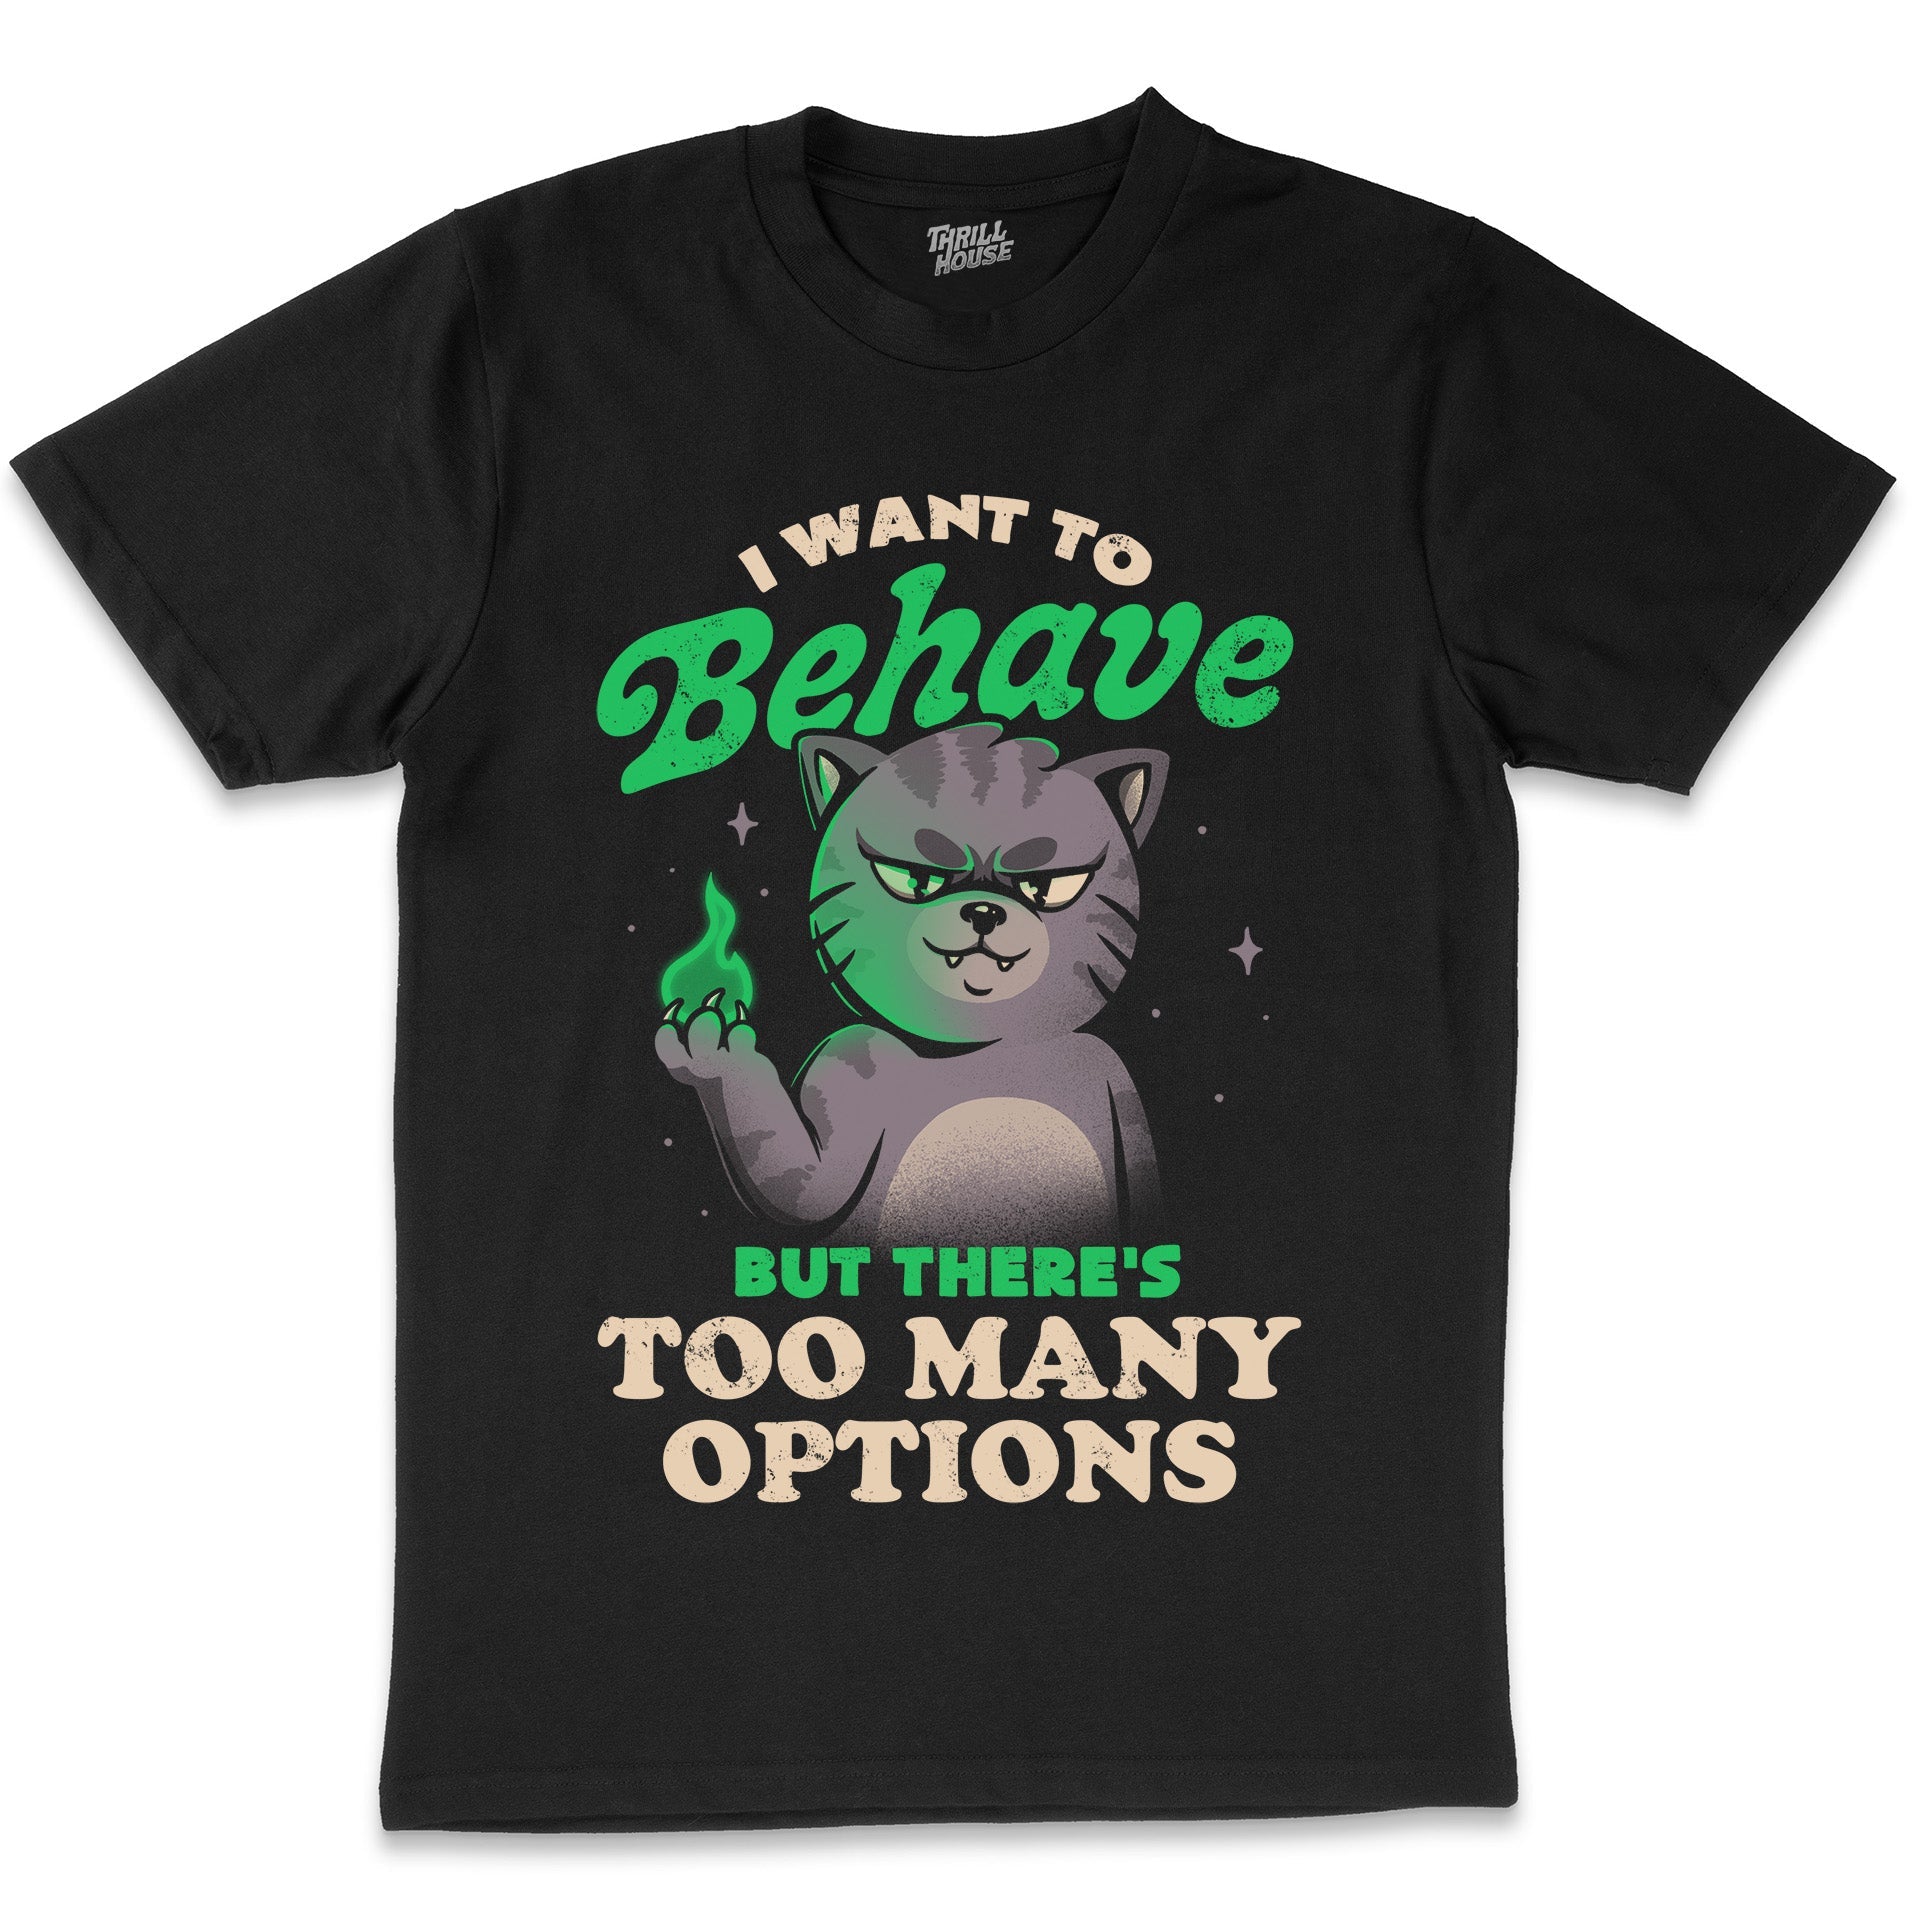 I Want to Behave But There's Too Many Options Funny Trouble Cat Kitten Slogan T-Shirt